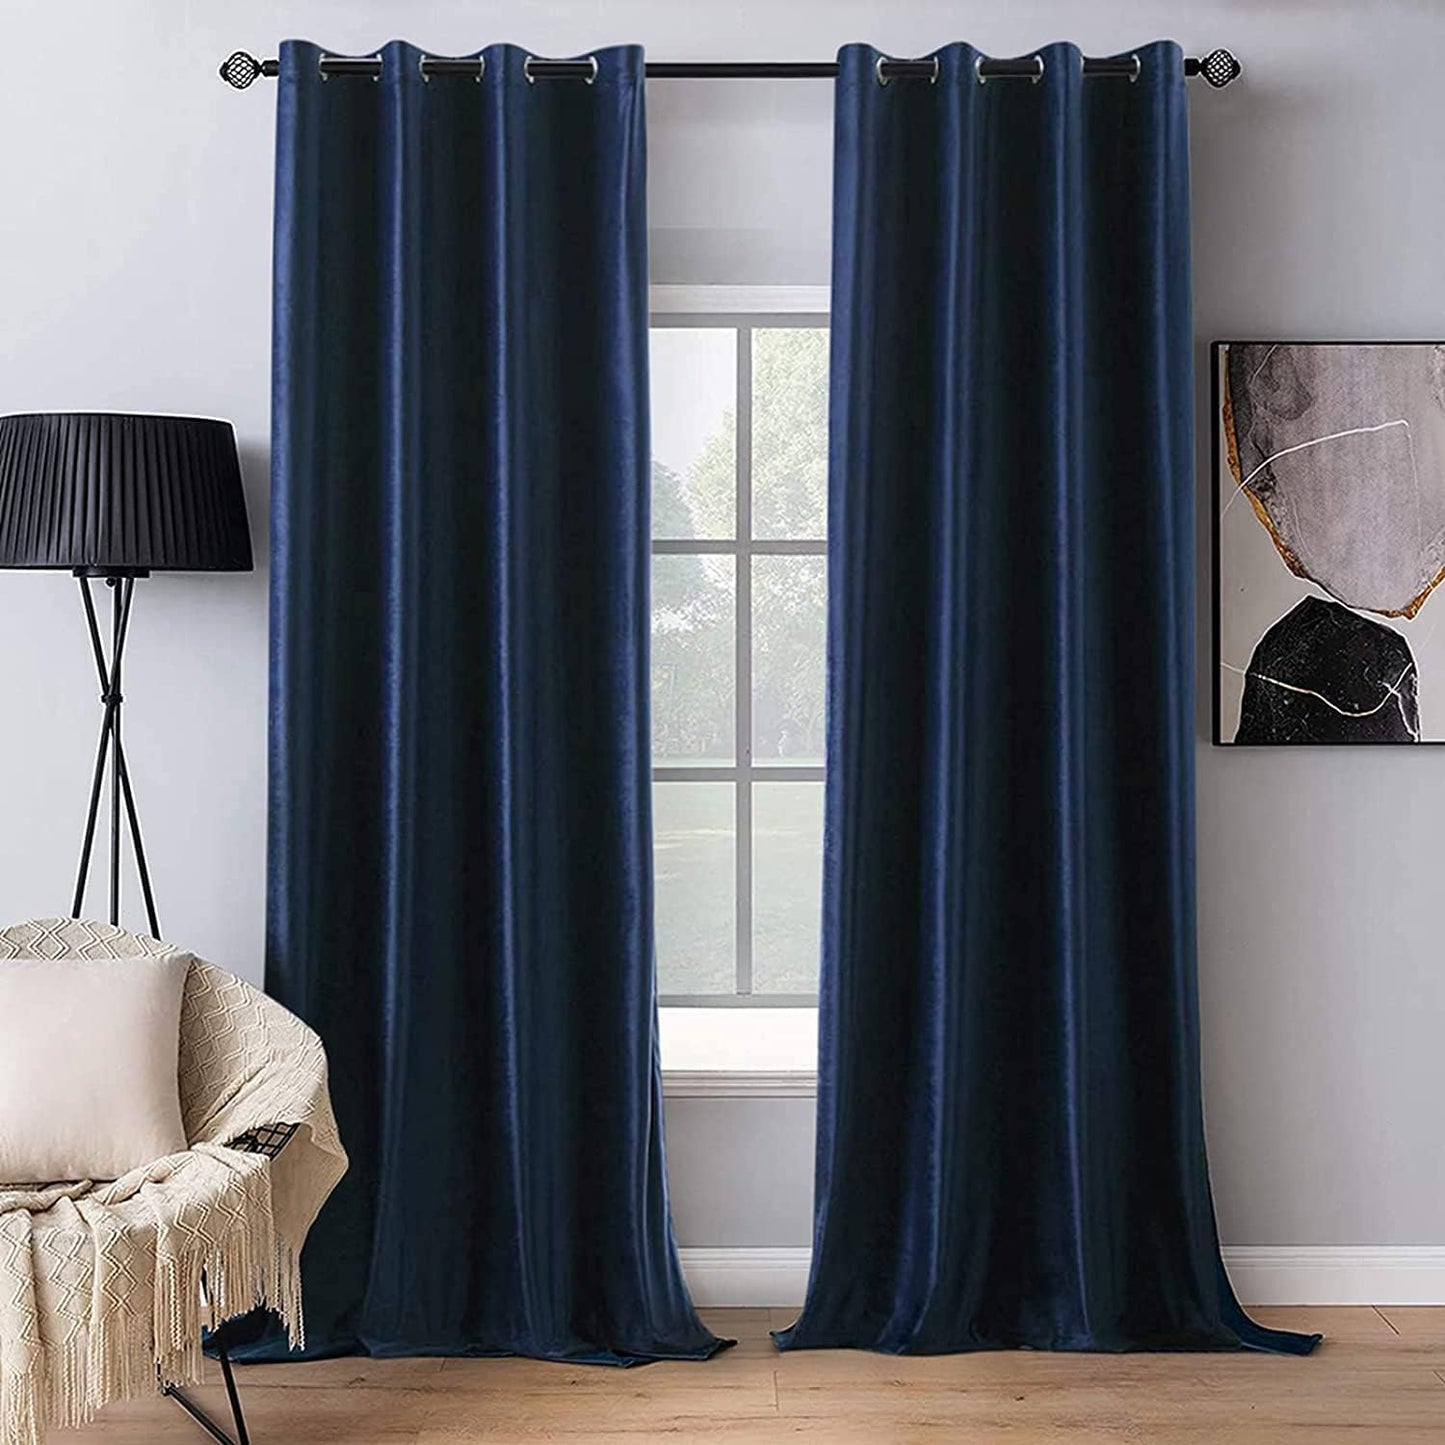 MIULEE Velvet Curtains Olive Green Elegant Grommet Curtains Thermal Insulated Soundproof Room Darkening Curtains/Drapes for Classical Living Room Bedroom Decor 52 X 84 Inch Set of 2  MIULEE Royal Blue W52 X L96 